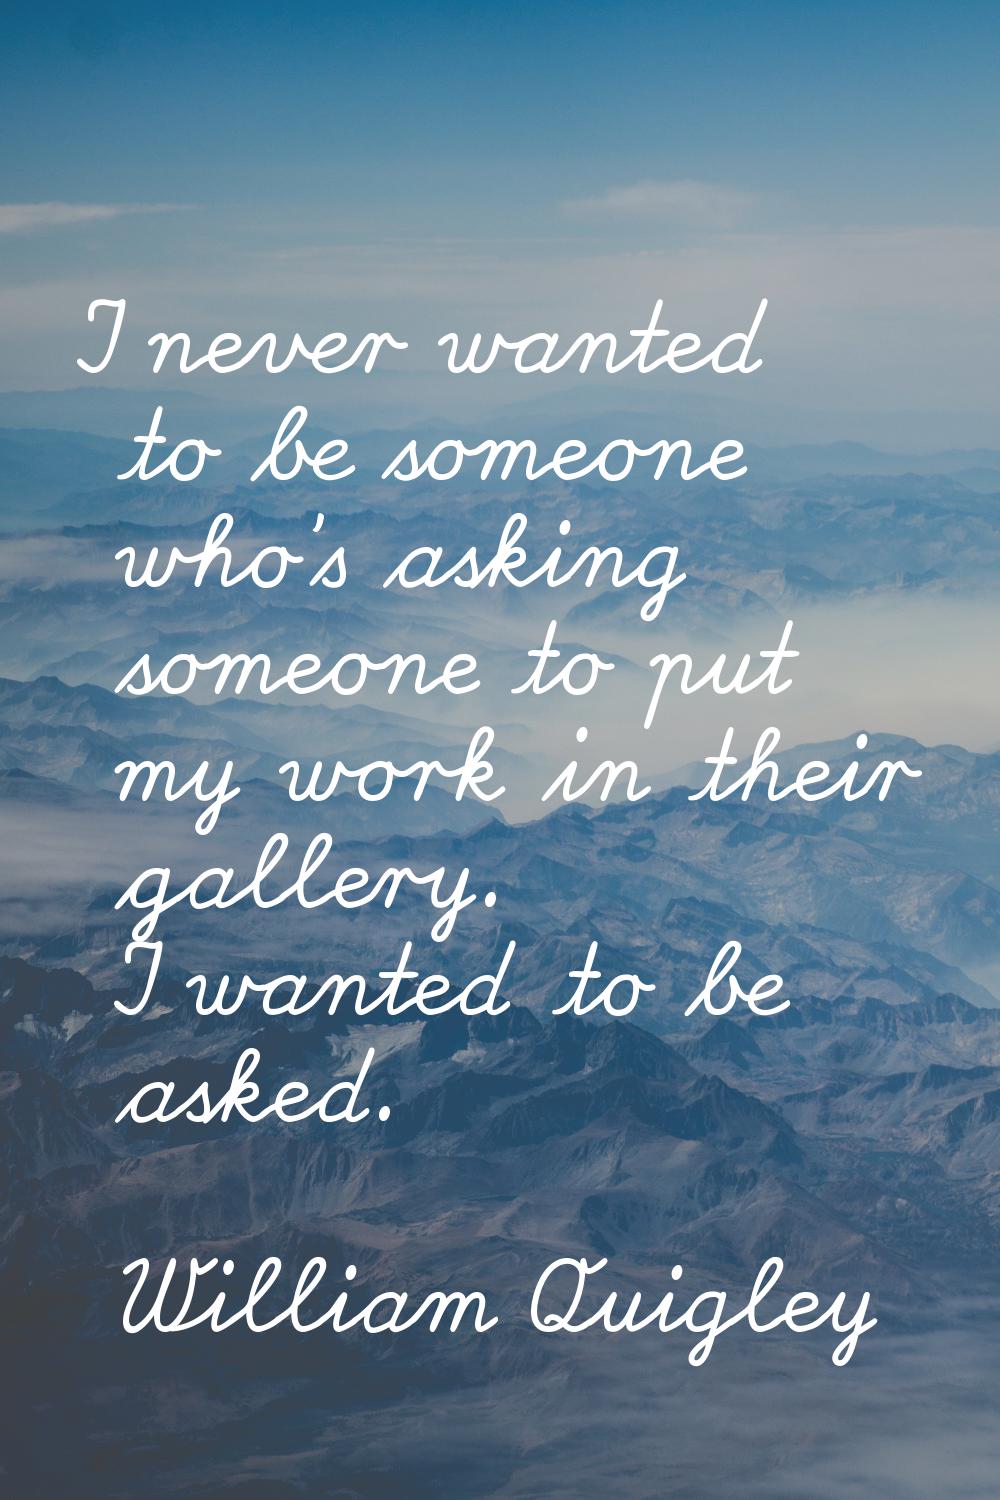 I never wanted to be someone who's asking someone to put my work in their gallery. I wanted to be a